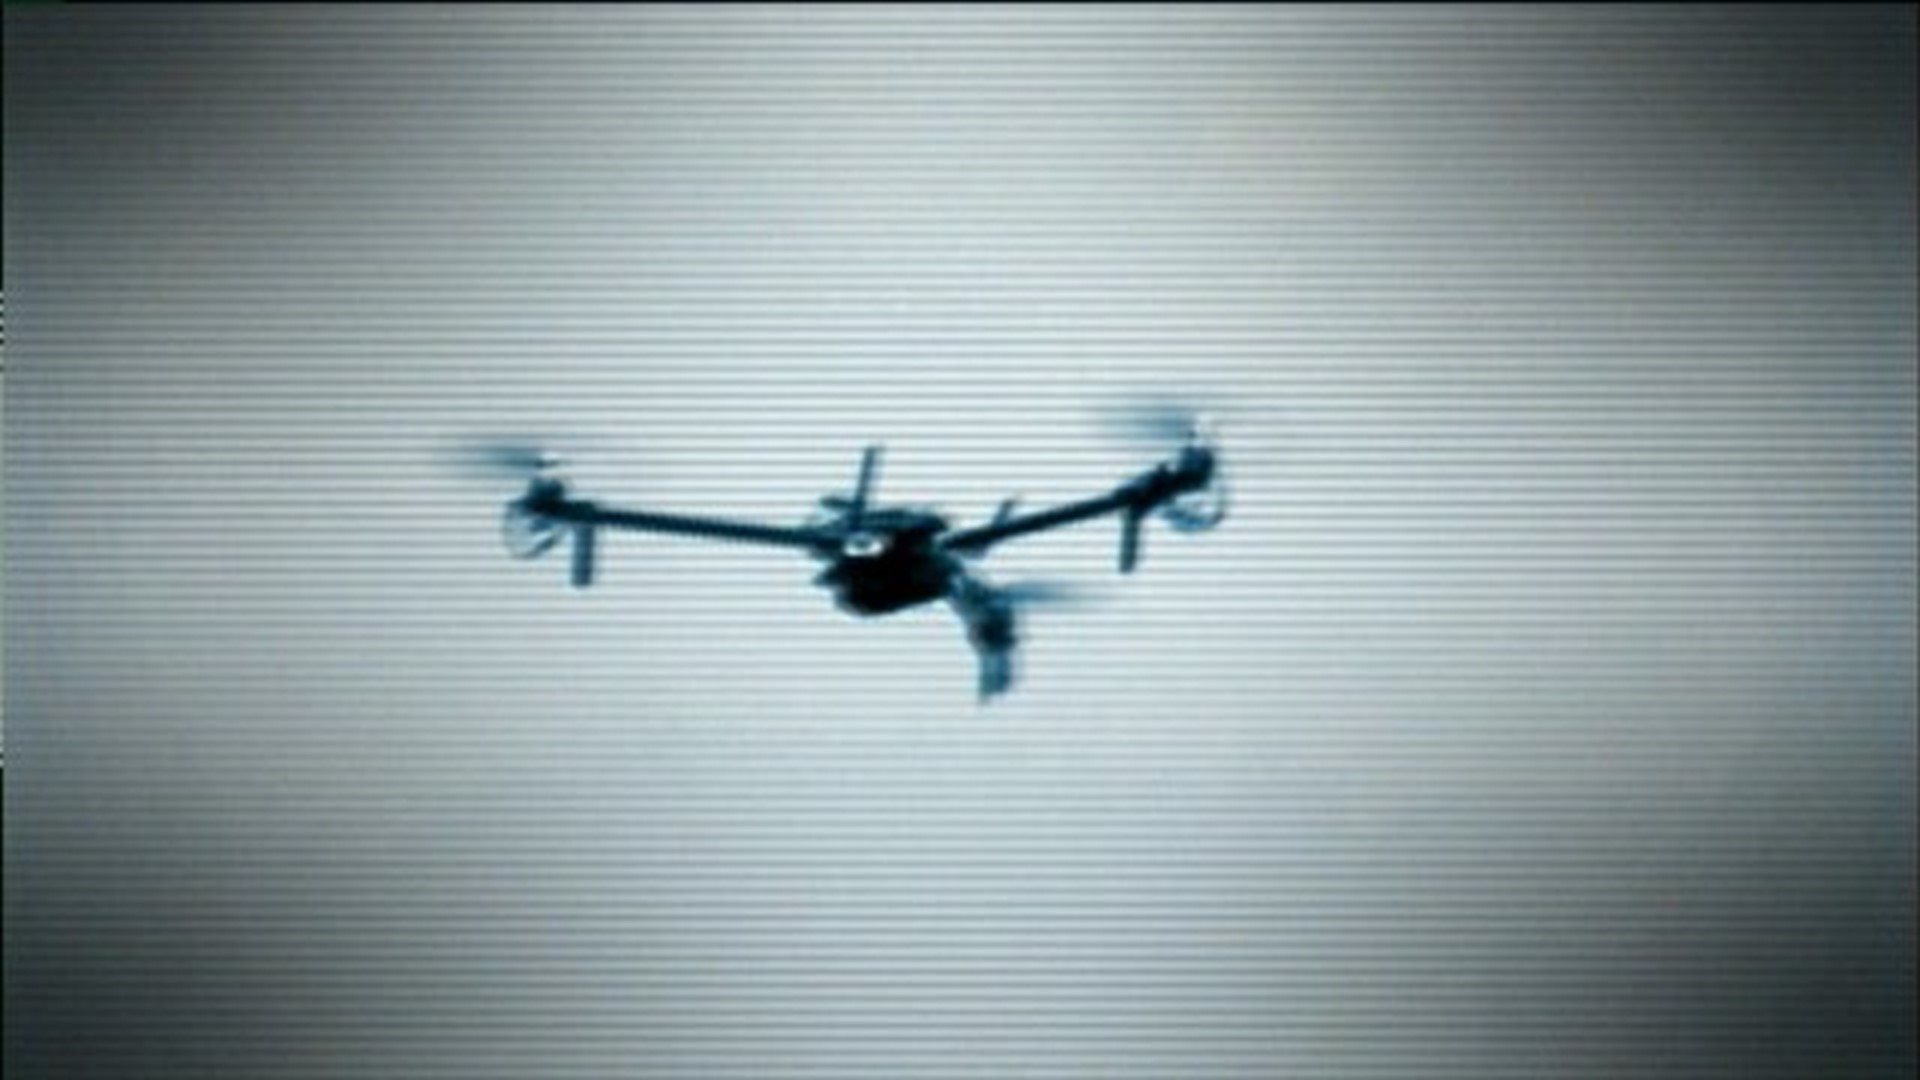 Drone, Helicopter In Near Midair Collision